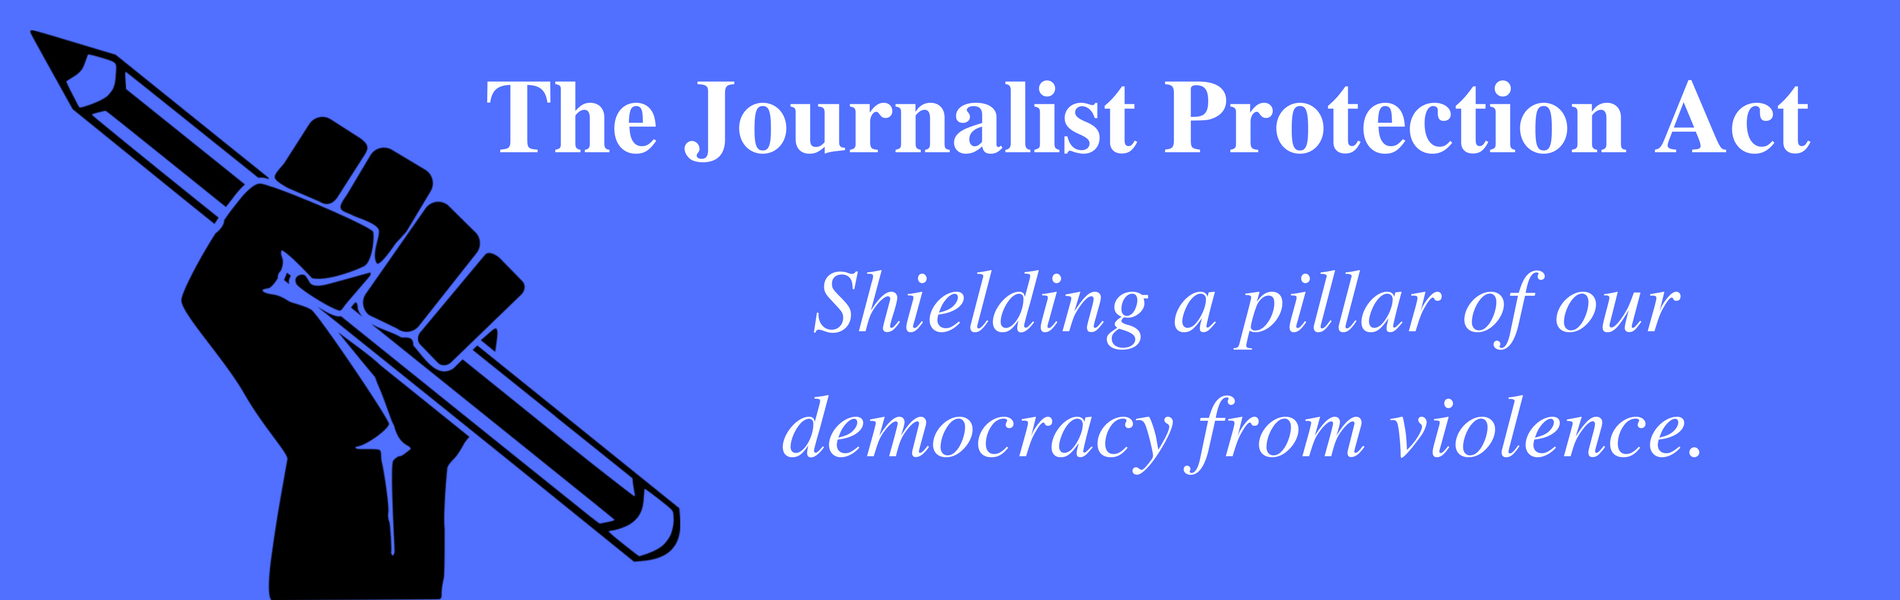 Swalwell Introduces the Journalist Protection Act